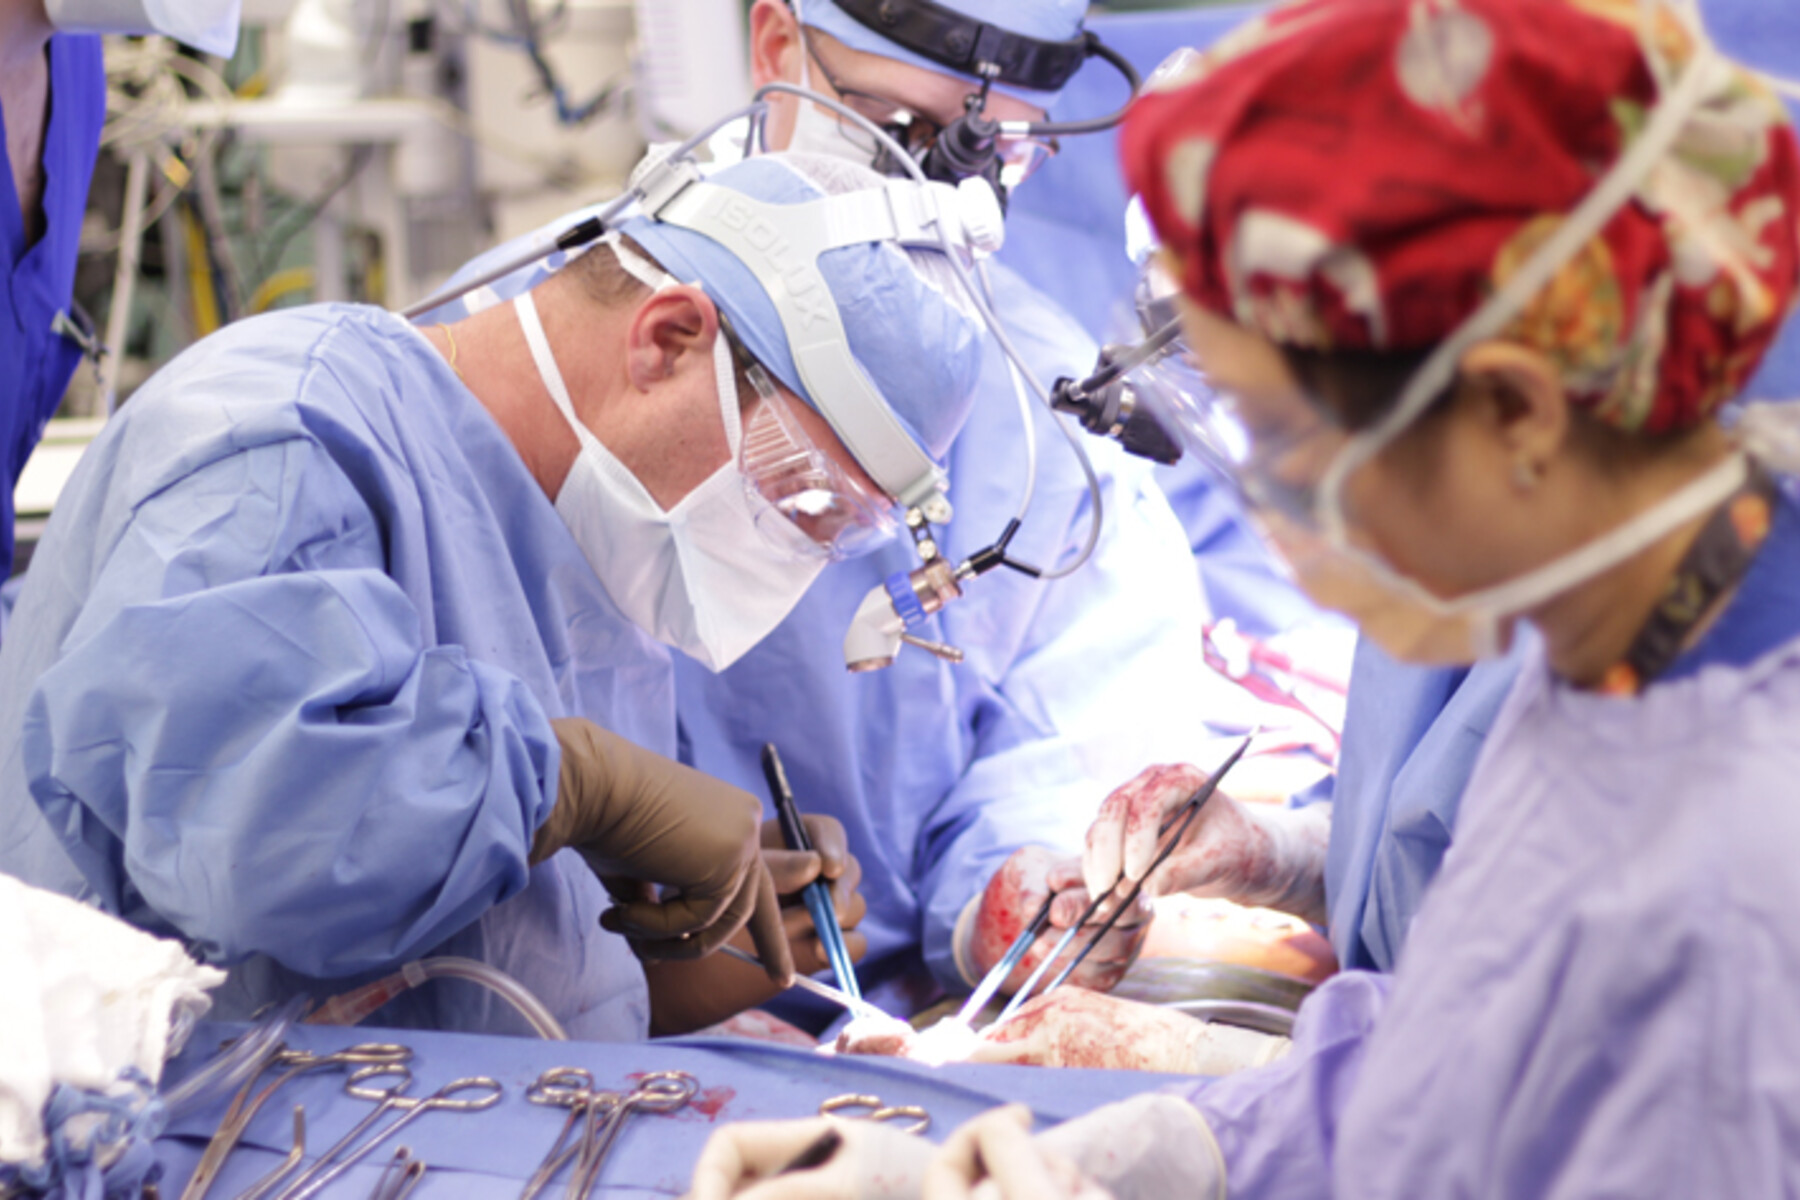 Marcelo Cypel and the TGHRI surgery team perform an organ transplant.